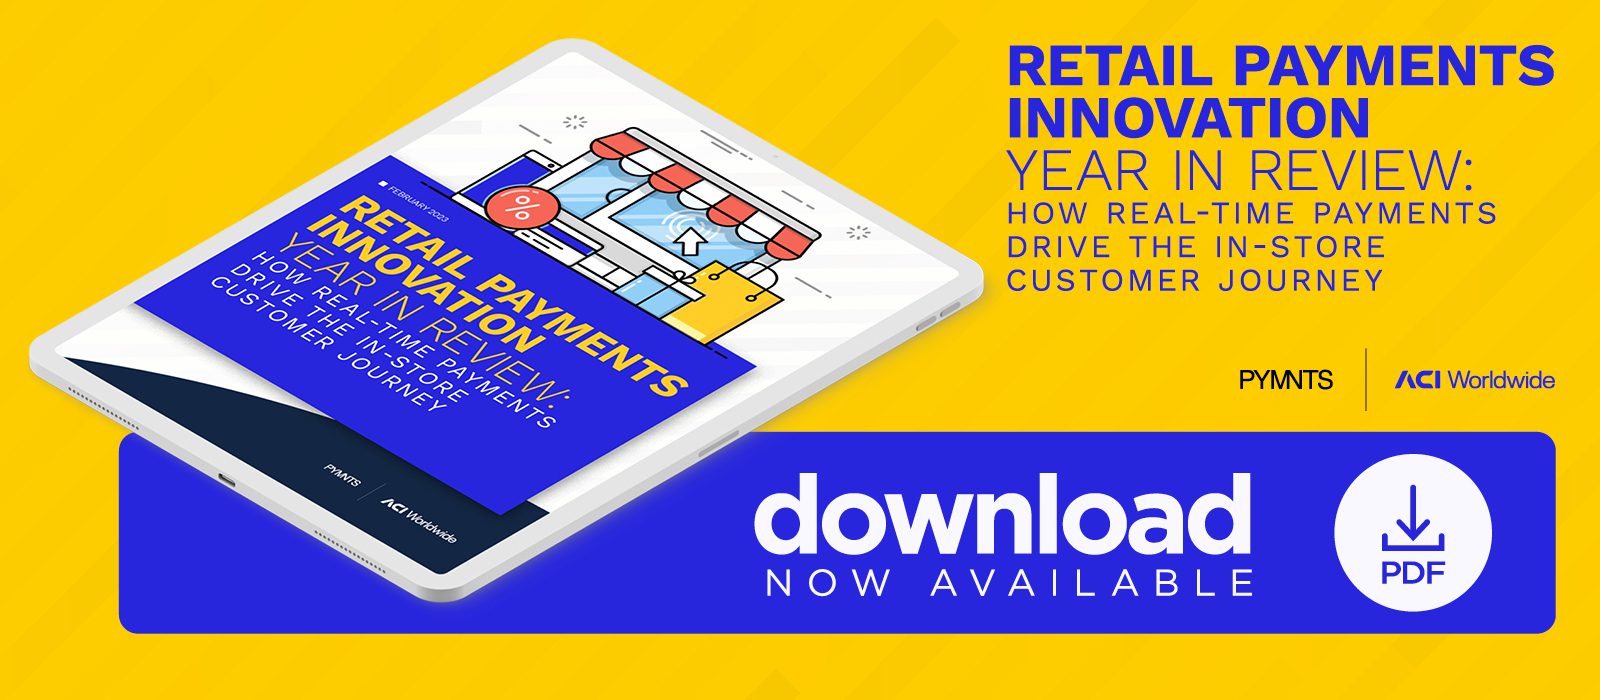 ACI Worldwide - Retail Payments Innovation Year in Review: How Real-Time Payments Drive the In-Store Customer Journey - February 2023 - Learn how retailers can implement new payment strategies to maintain customer loyalty and increase engagement